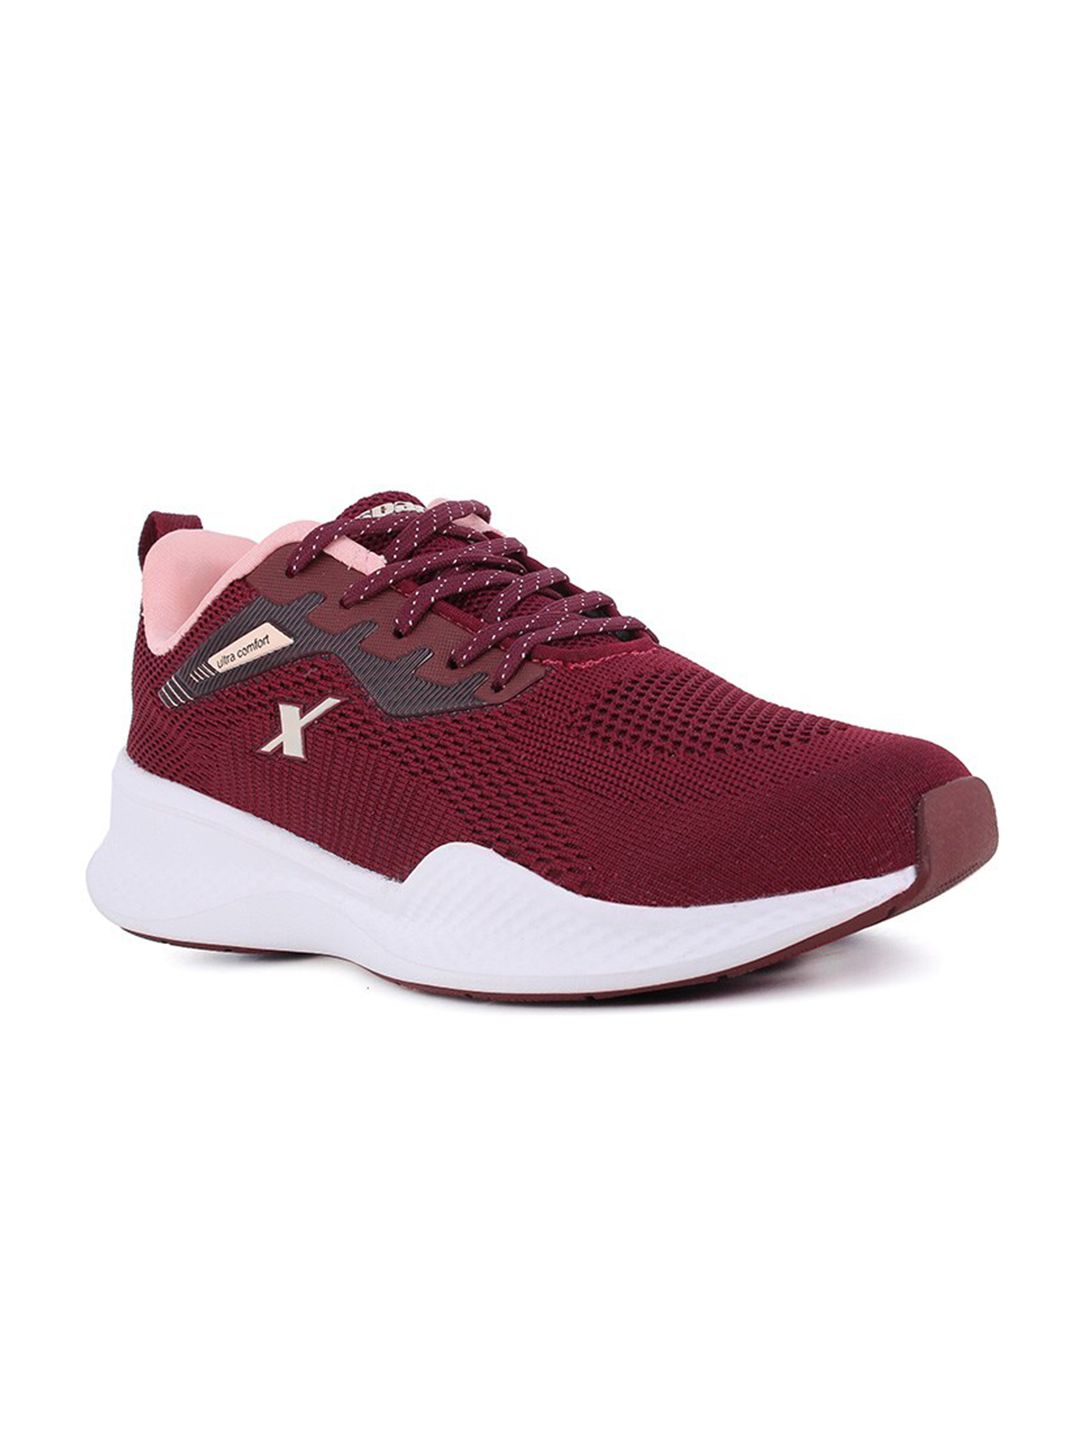 Sparx Women Maroon Textile Running Non-Marking Shoes Price in India